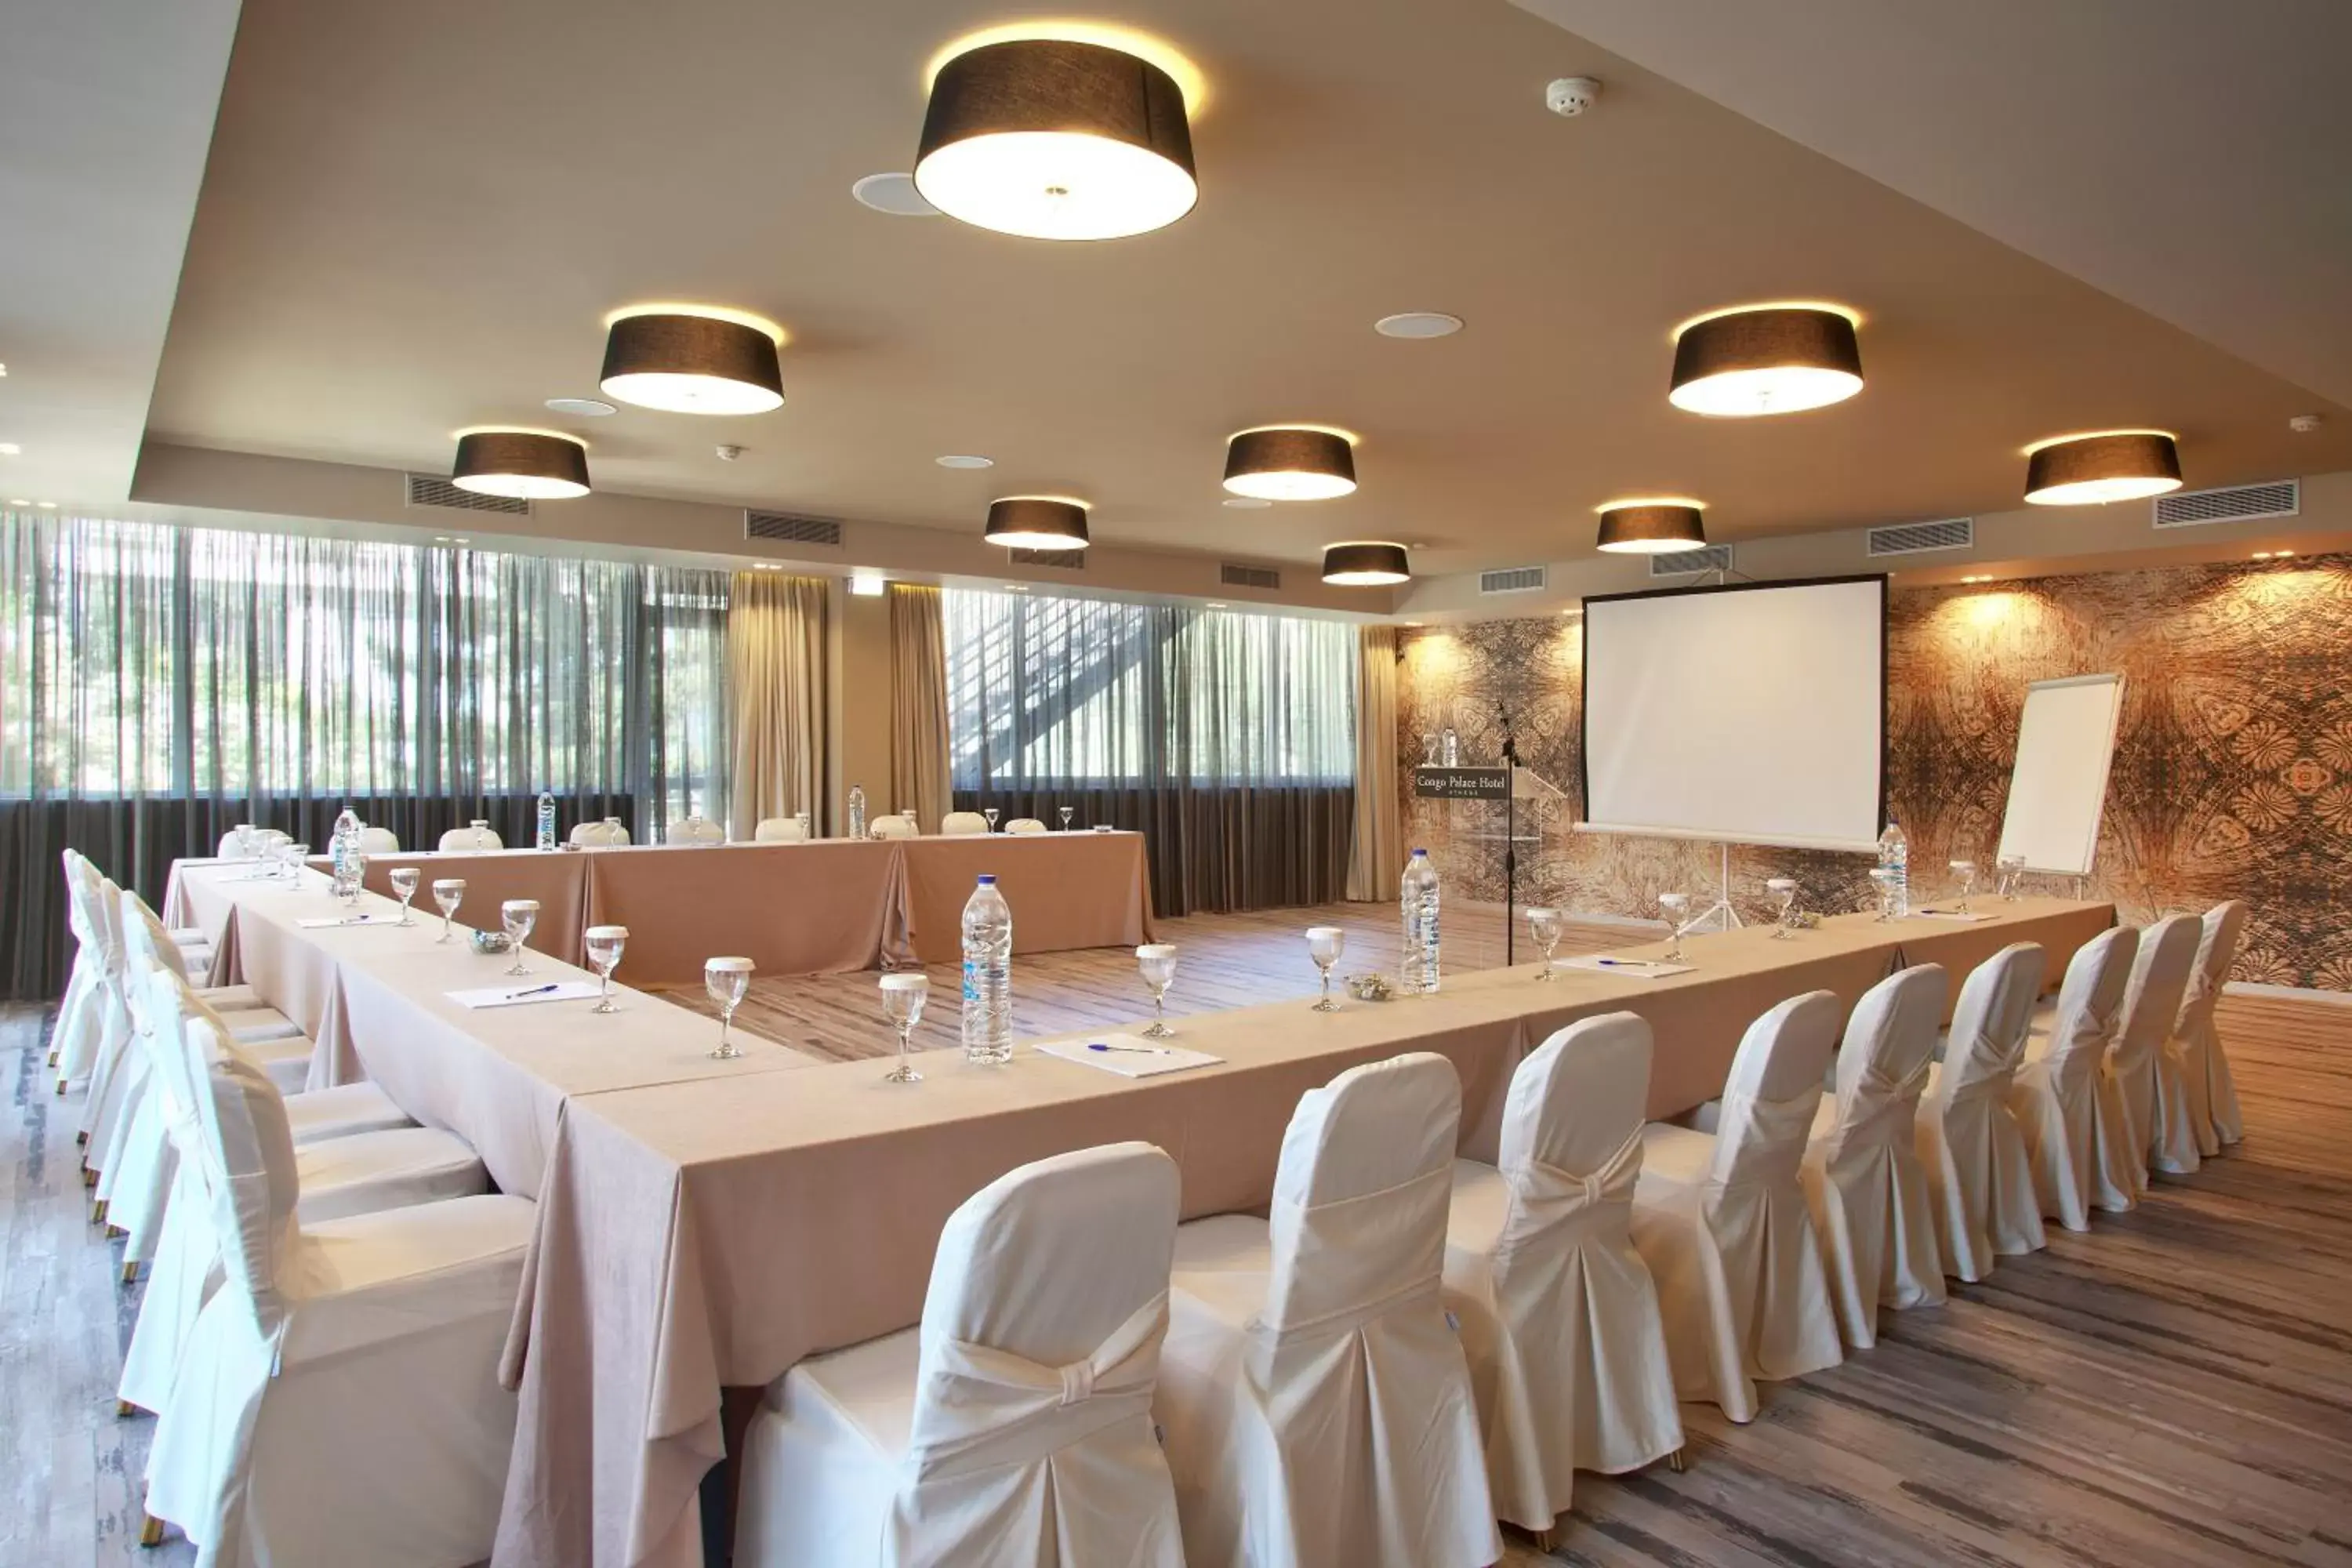 Meeting/conference room in Congo Palace Hotel